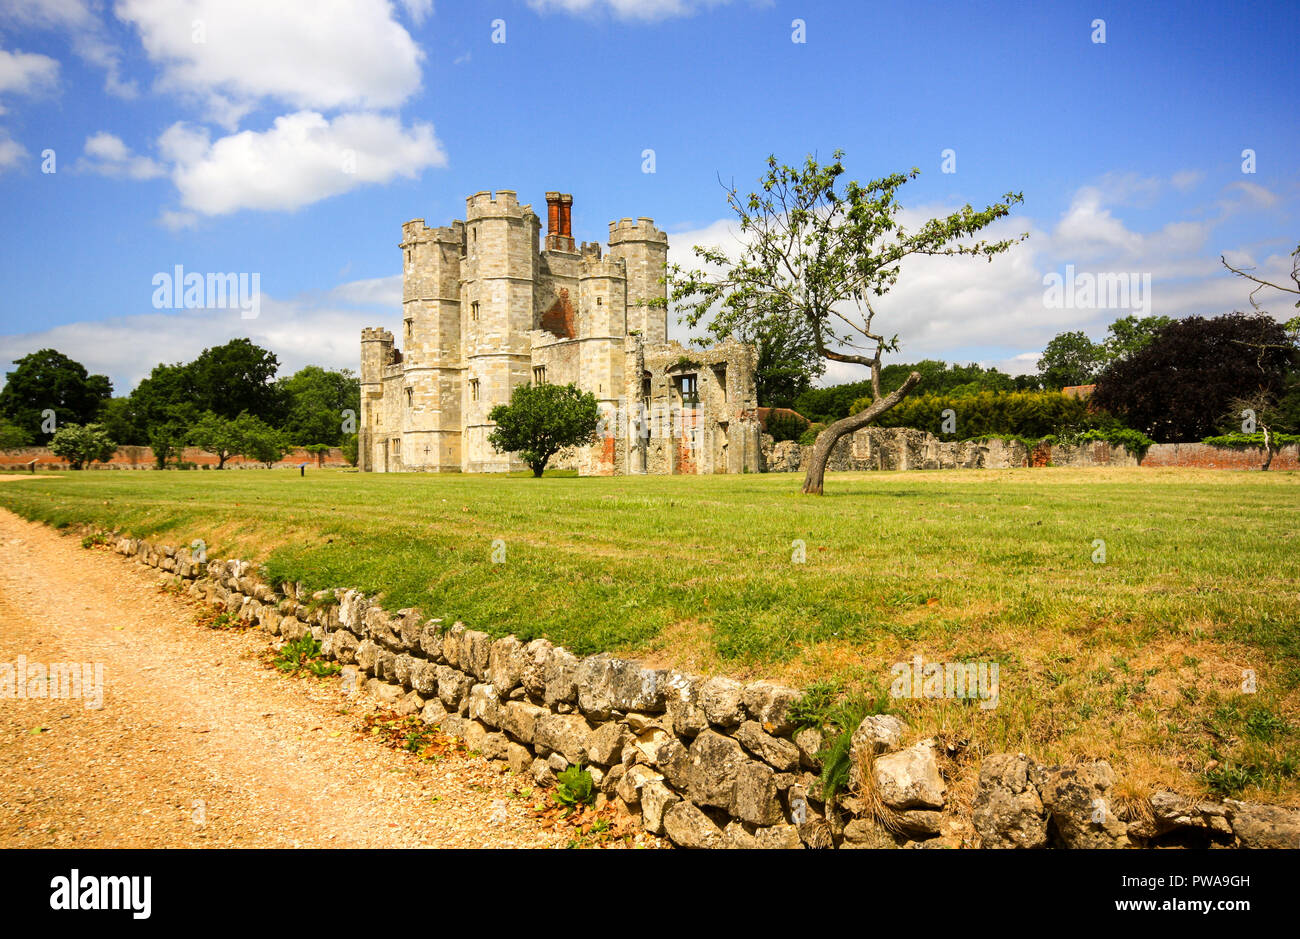 Medieval Titchfield Abbey founded in 1222 an English heritage site located in the village of Titchfield near Fareham in Hampshire, England UK Stock Photo